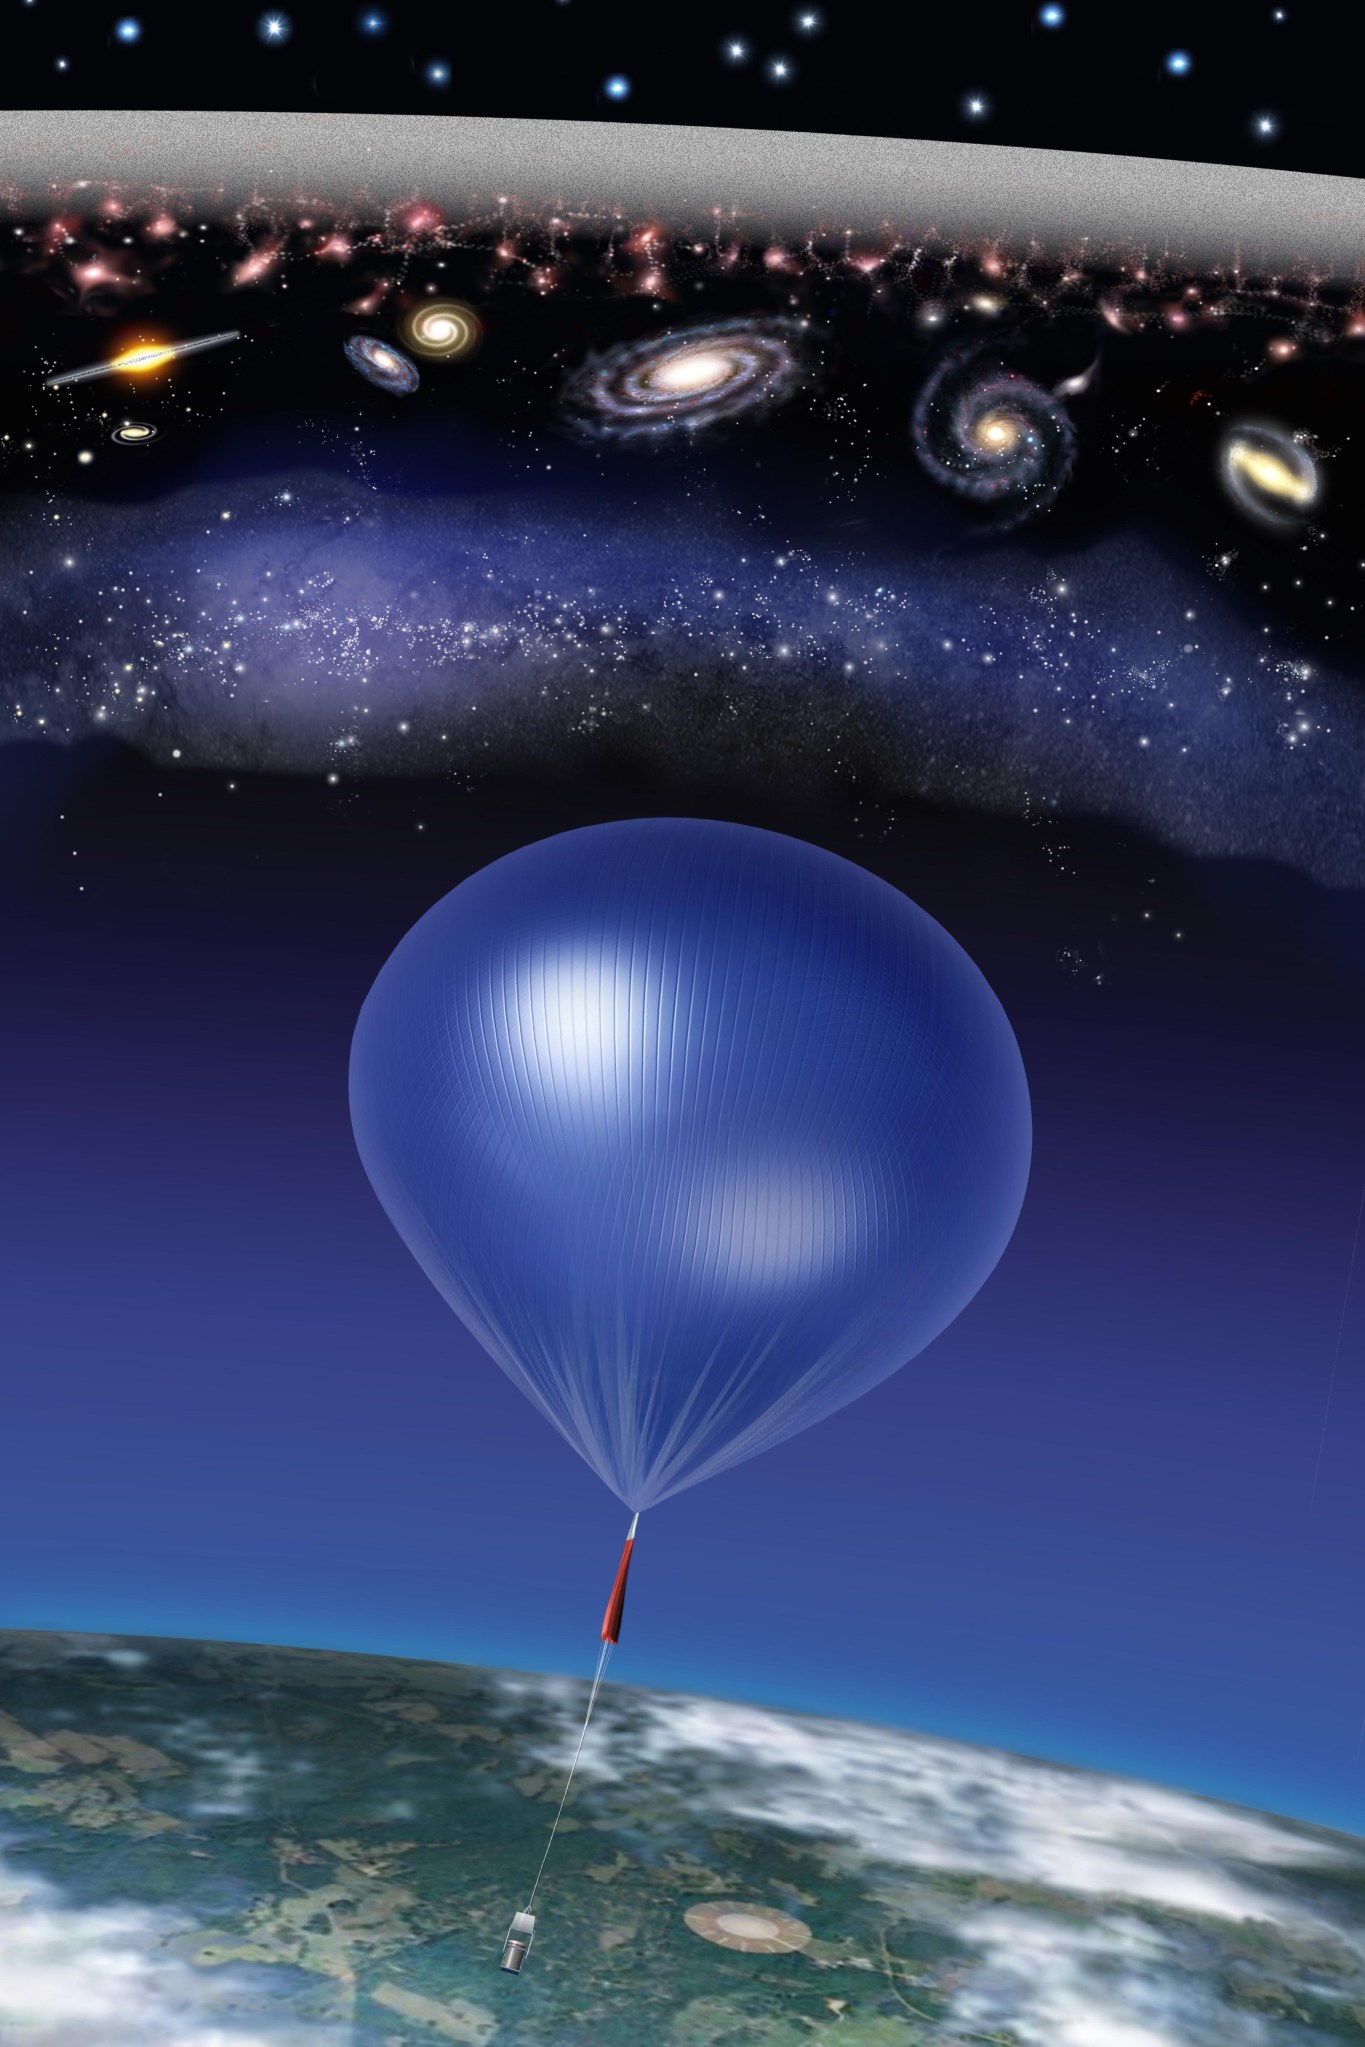 A near-transparent spherical balloon rises above Earth in this illustration. Near its top, the sky transitions from blue to the black of space, the stars in our galaxy, other galaxies in whites, yellows, and reds, and more distant galaxies in red that merge into a gray arc representing cosmic static in radio. Above this shine the first stars and galaxies in blue-white.